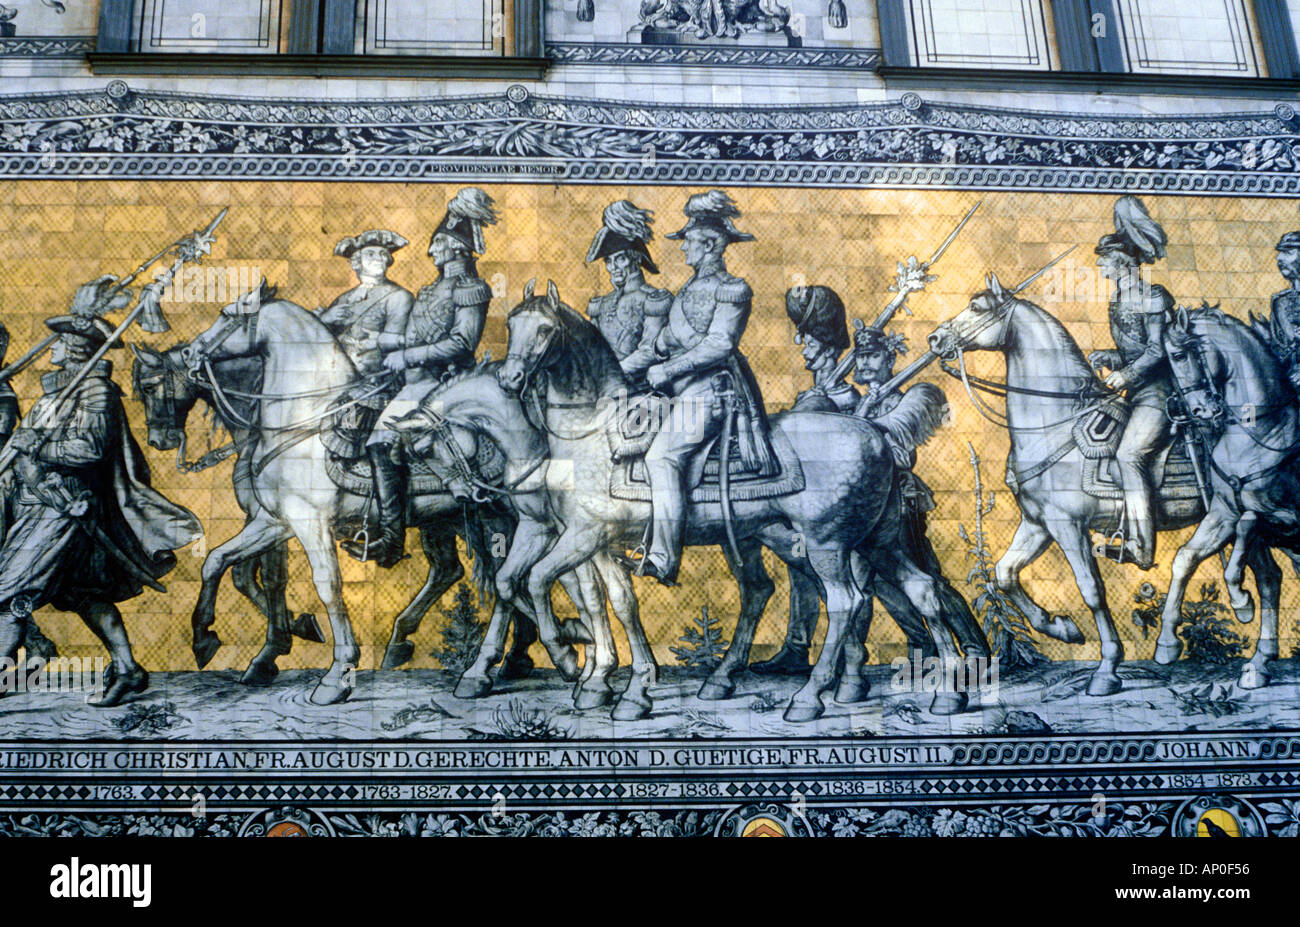 Fürstenzug a mural painting in Dresden, Germany, on Meissen ceramic tiles depicting the ruling dukes of Saxony Stock Photo